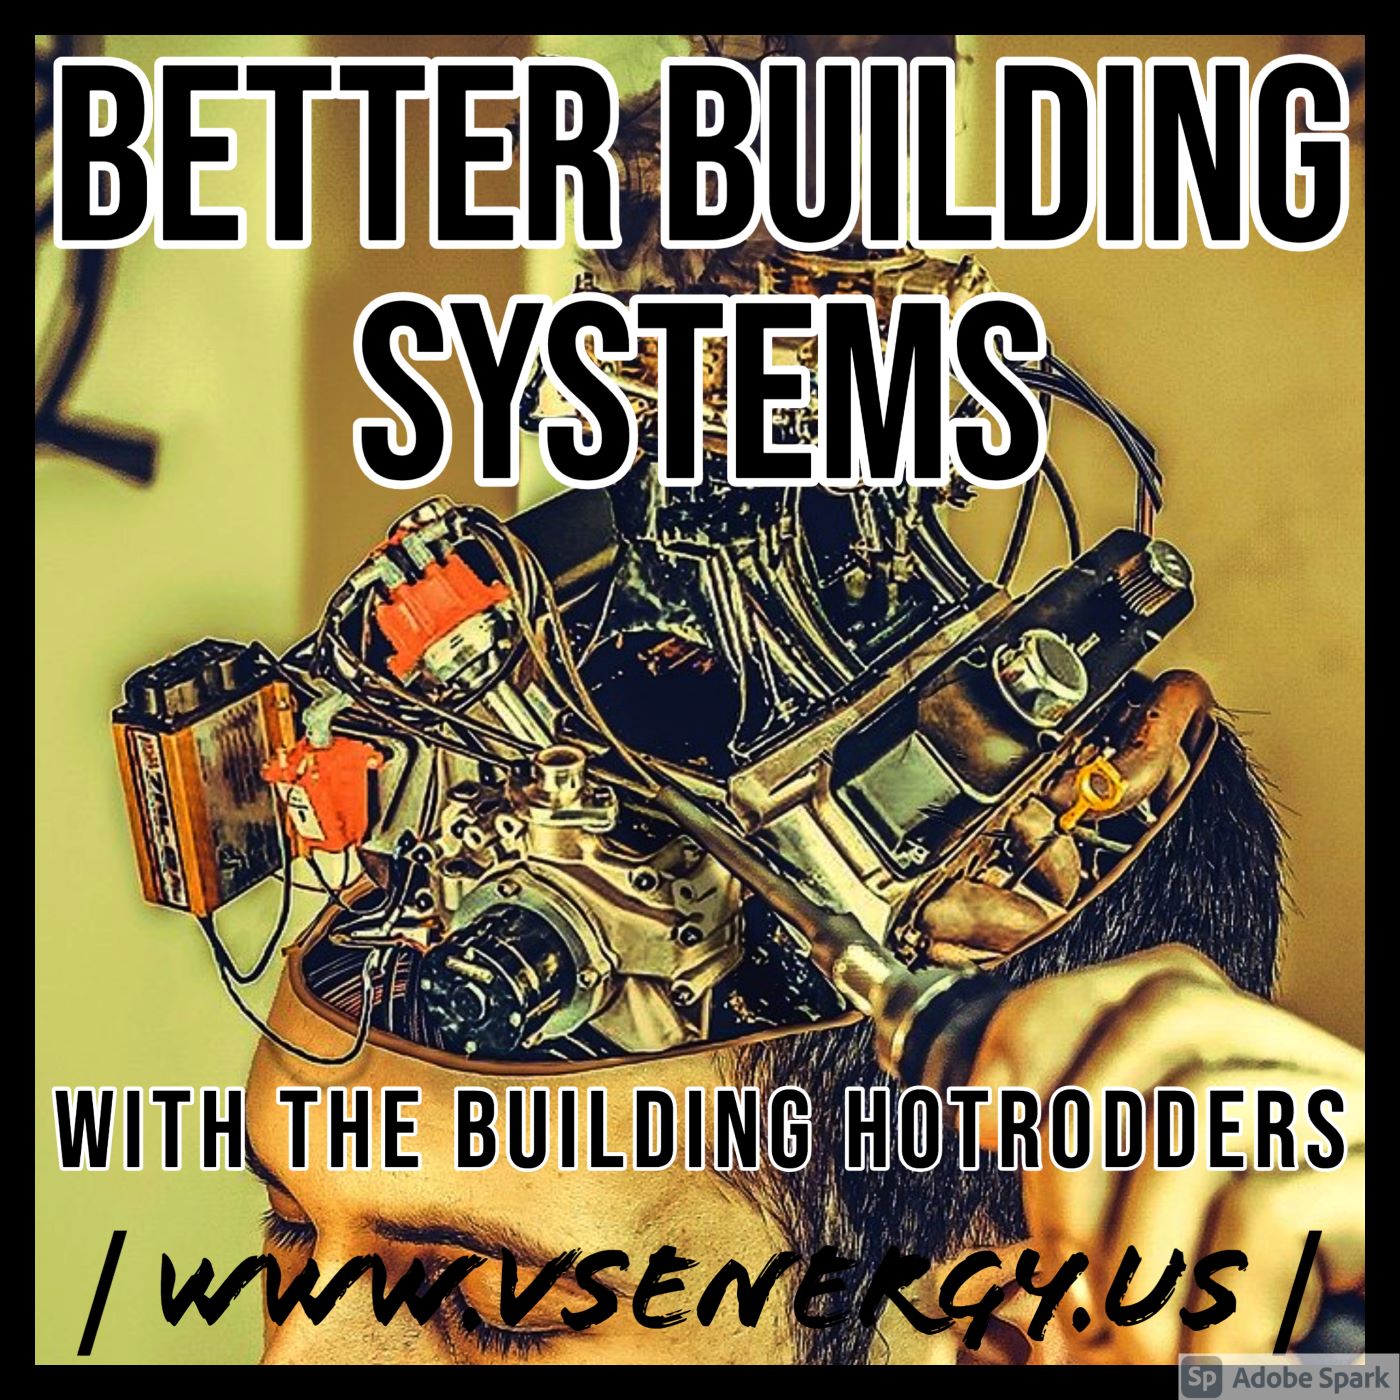 Artwork for Better Building Systems